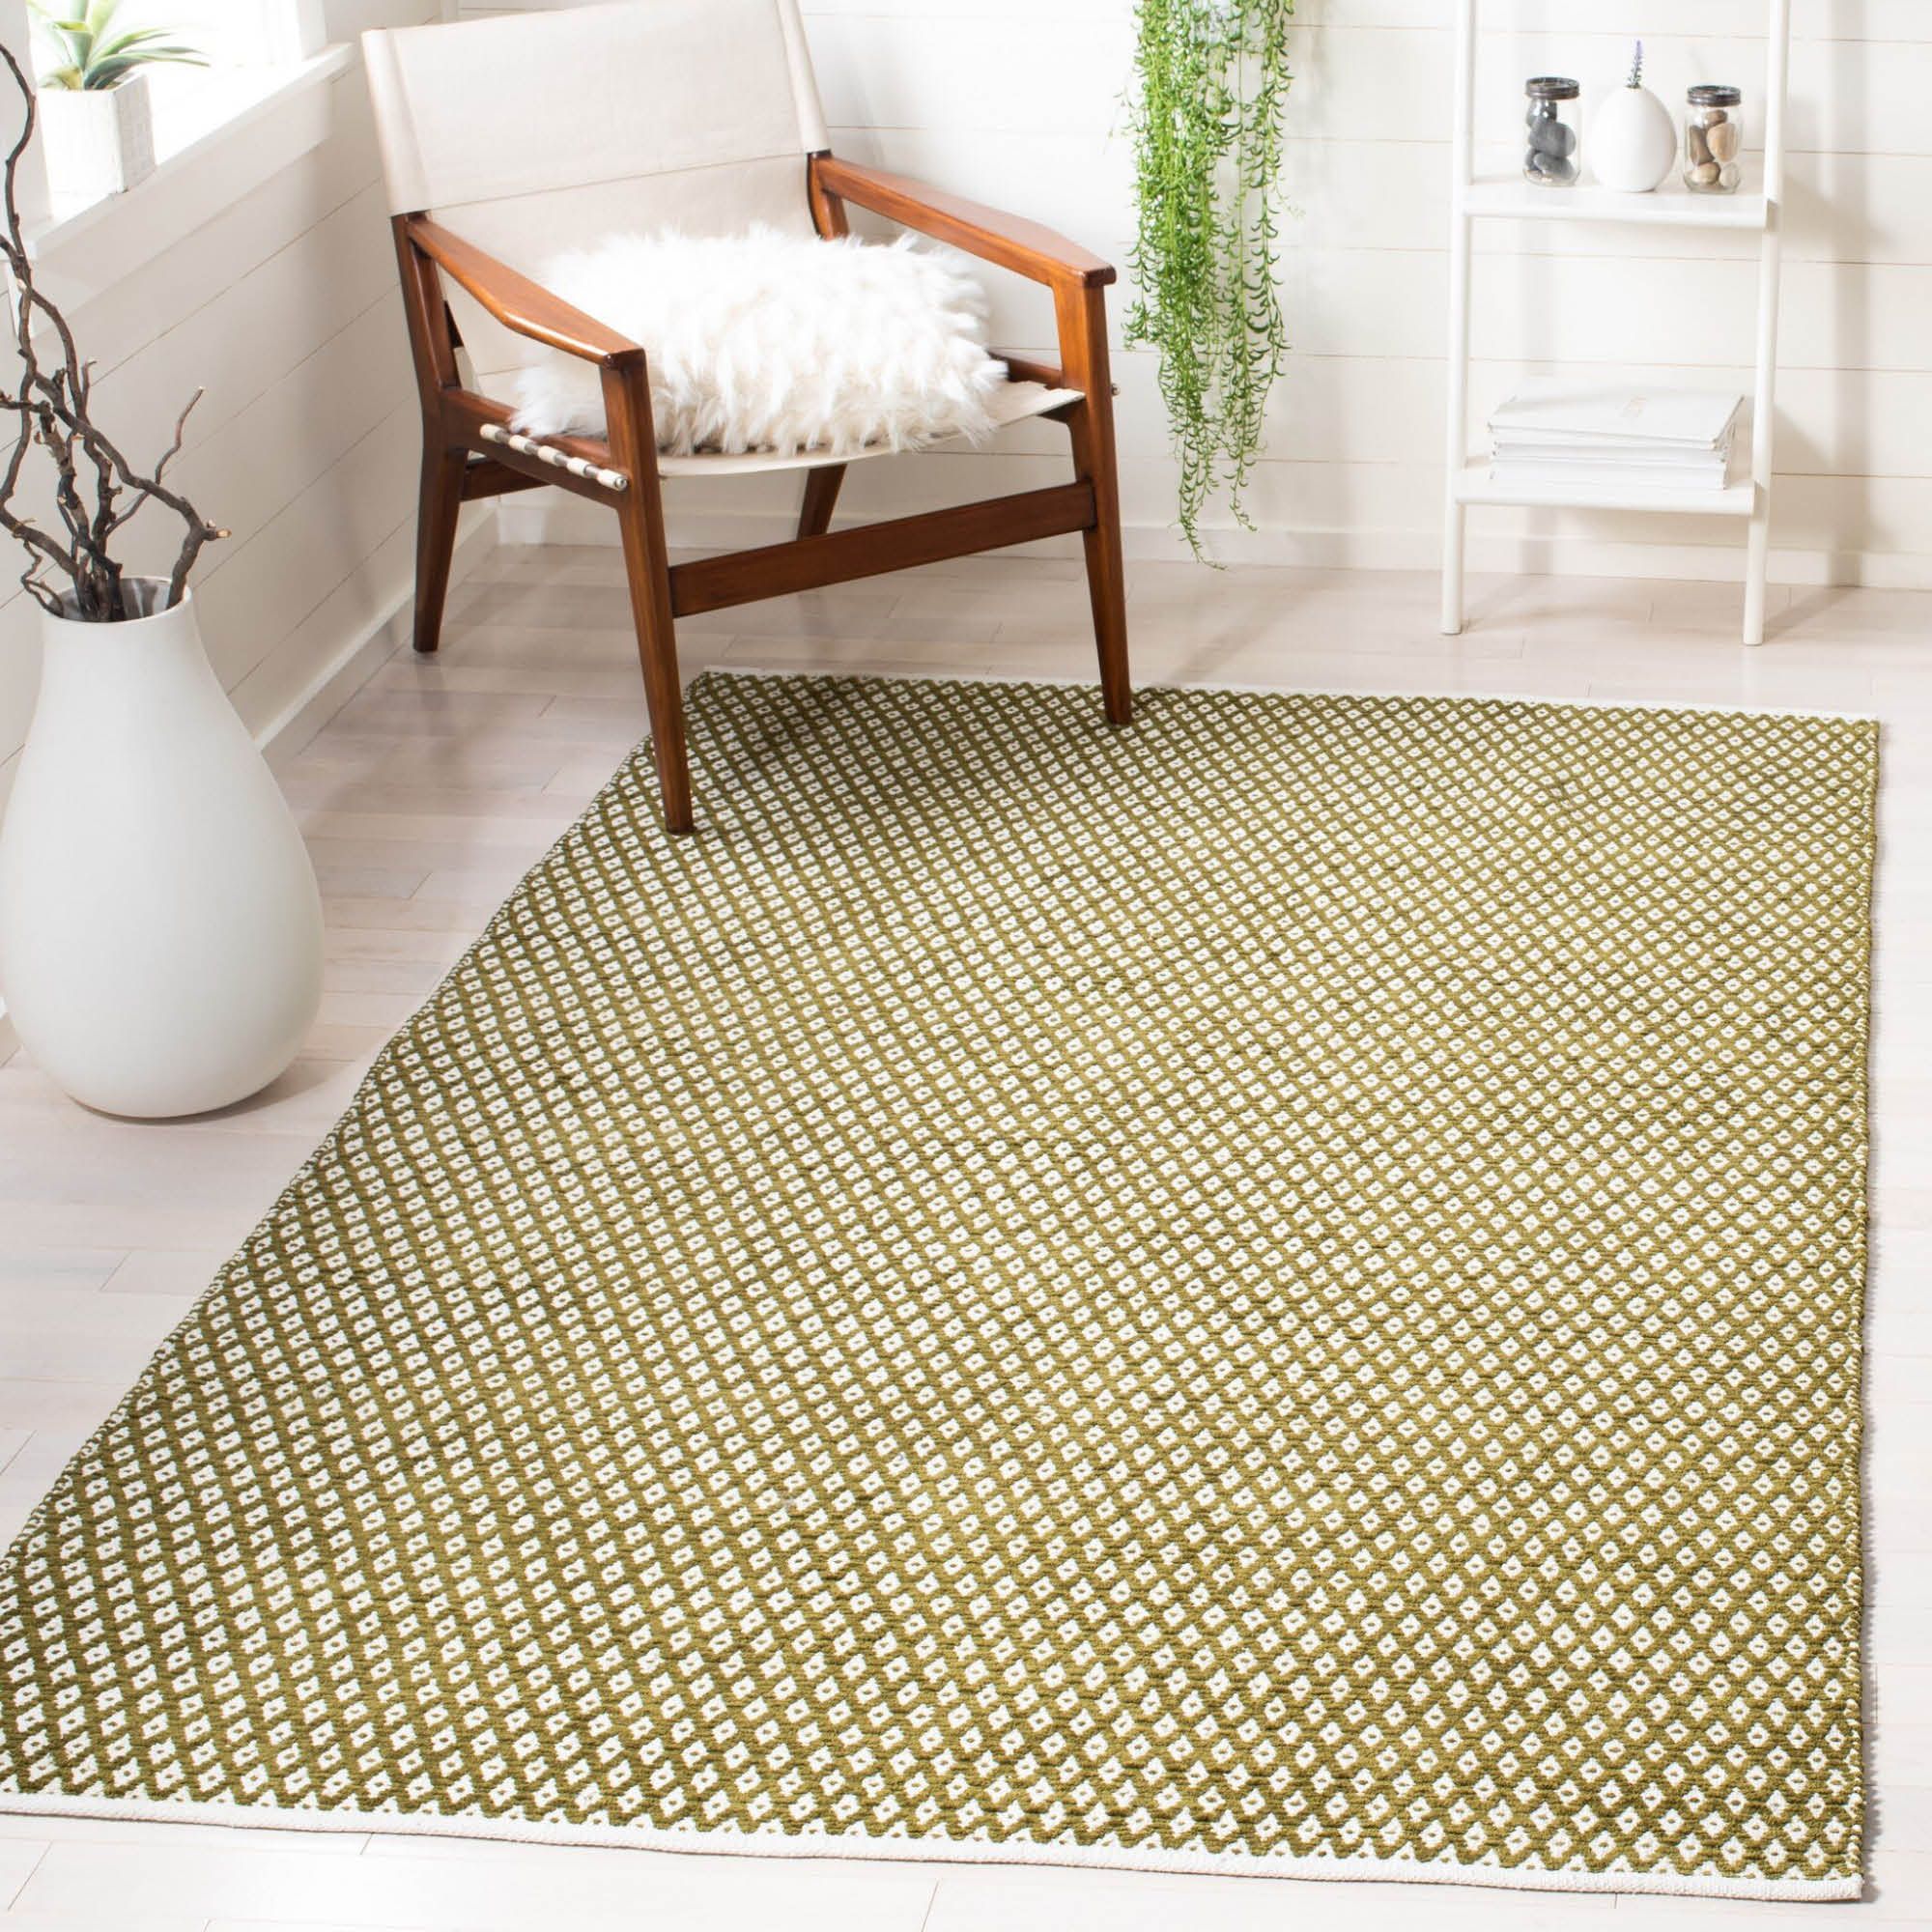 The 9 Best Washable Rugs 2021 - Best Machine Washable Rugs